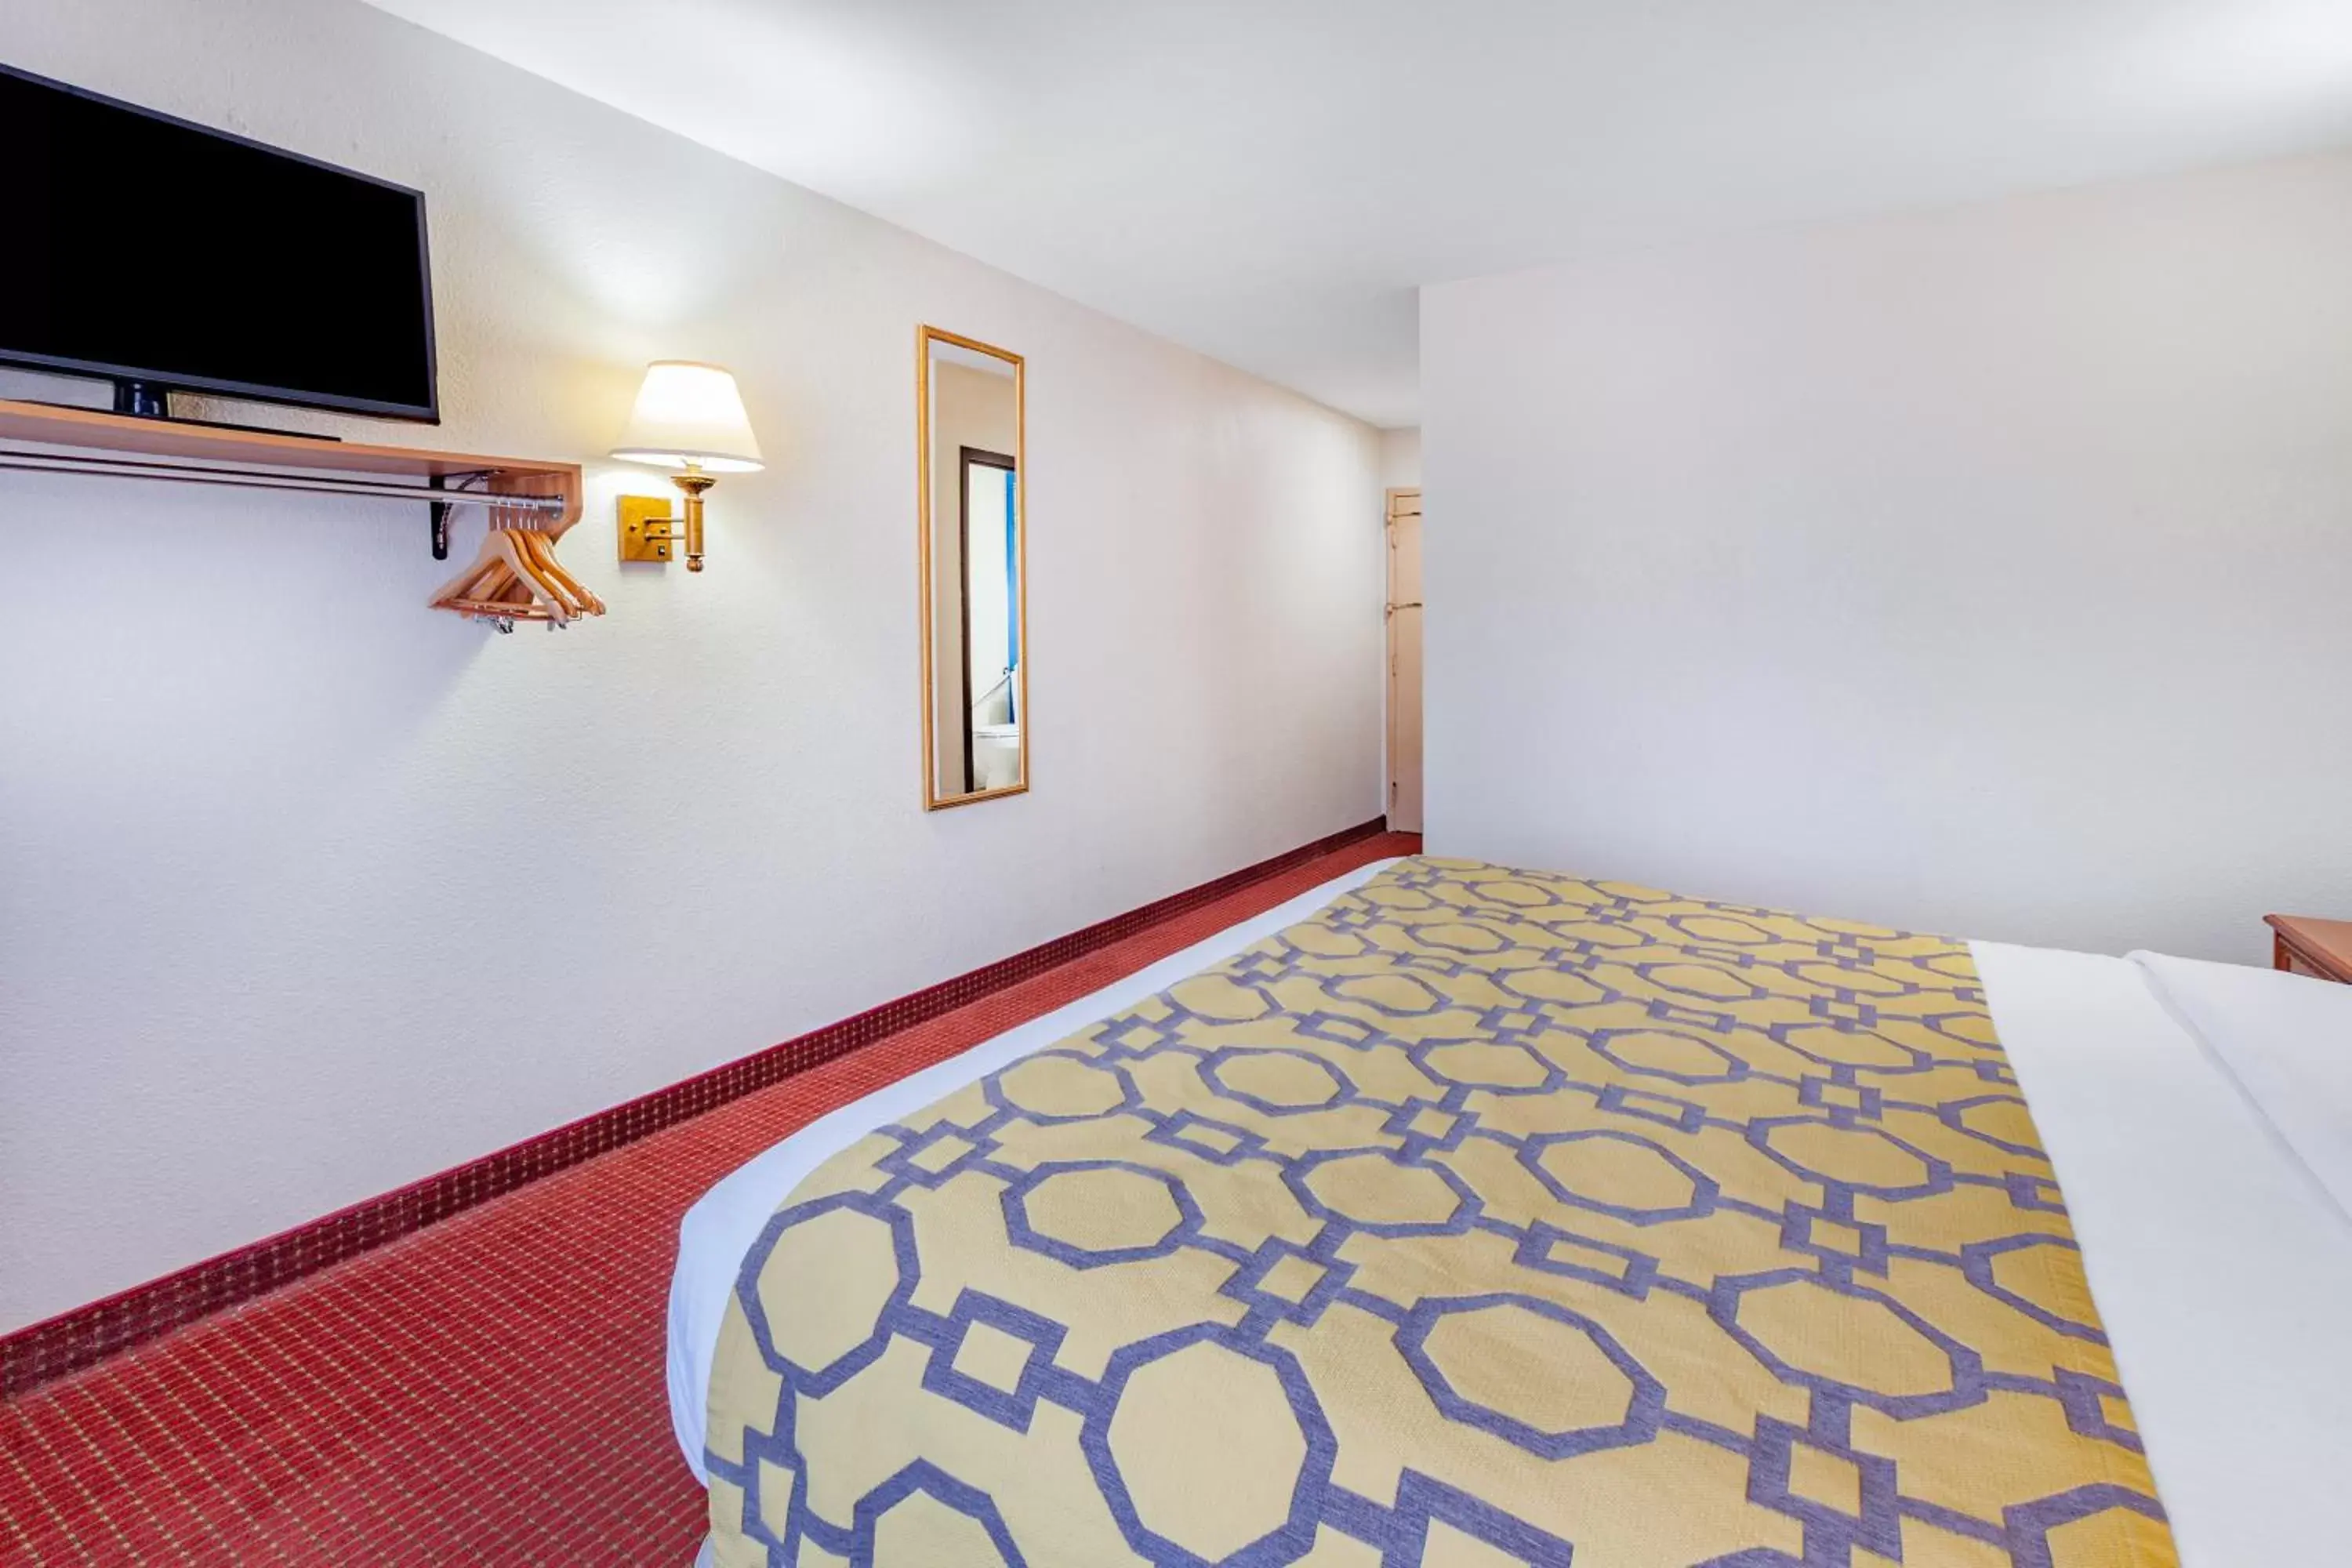 Facility for disabled guests, Bed in Baymont by Wyndham Perrysburg-Toledo